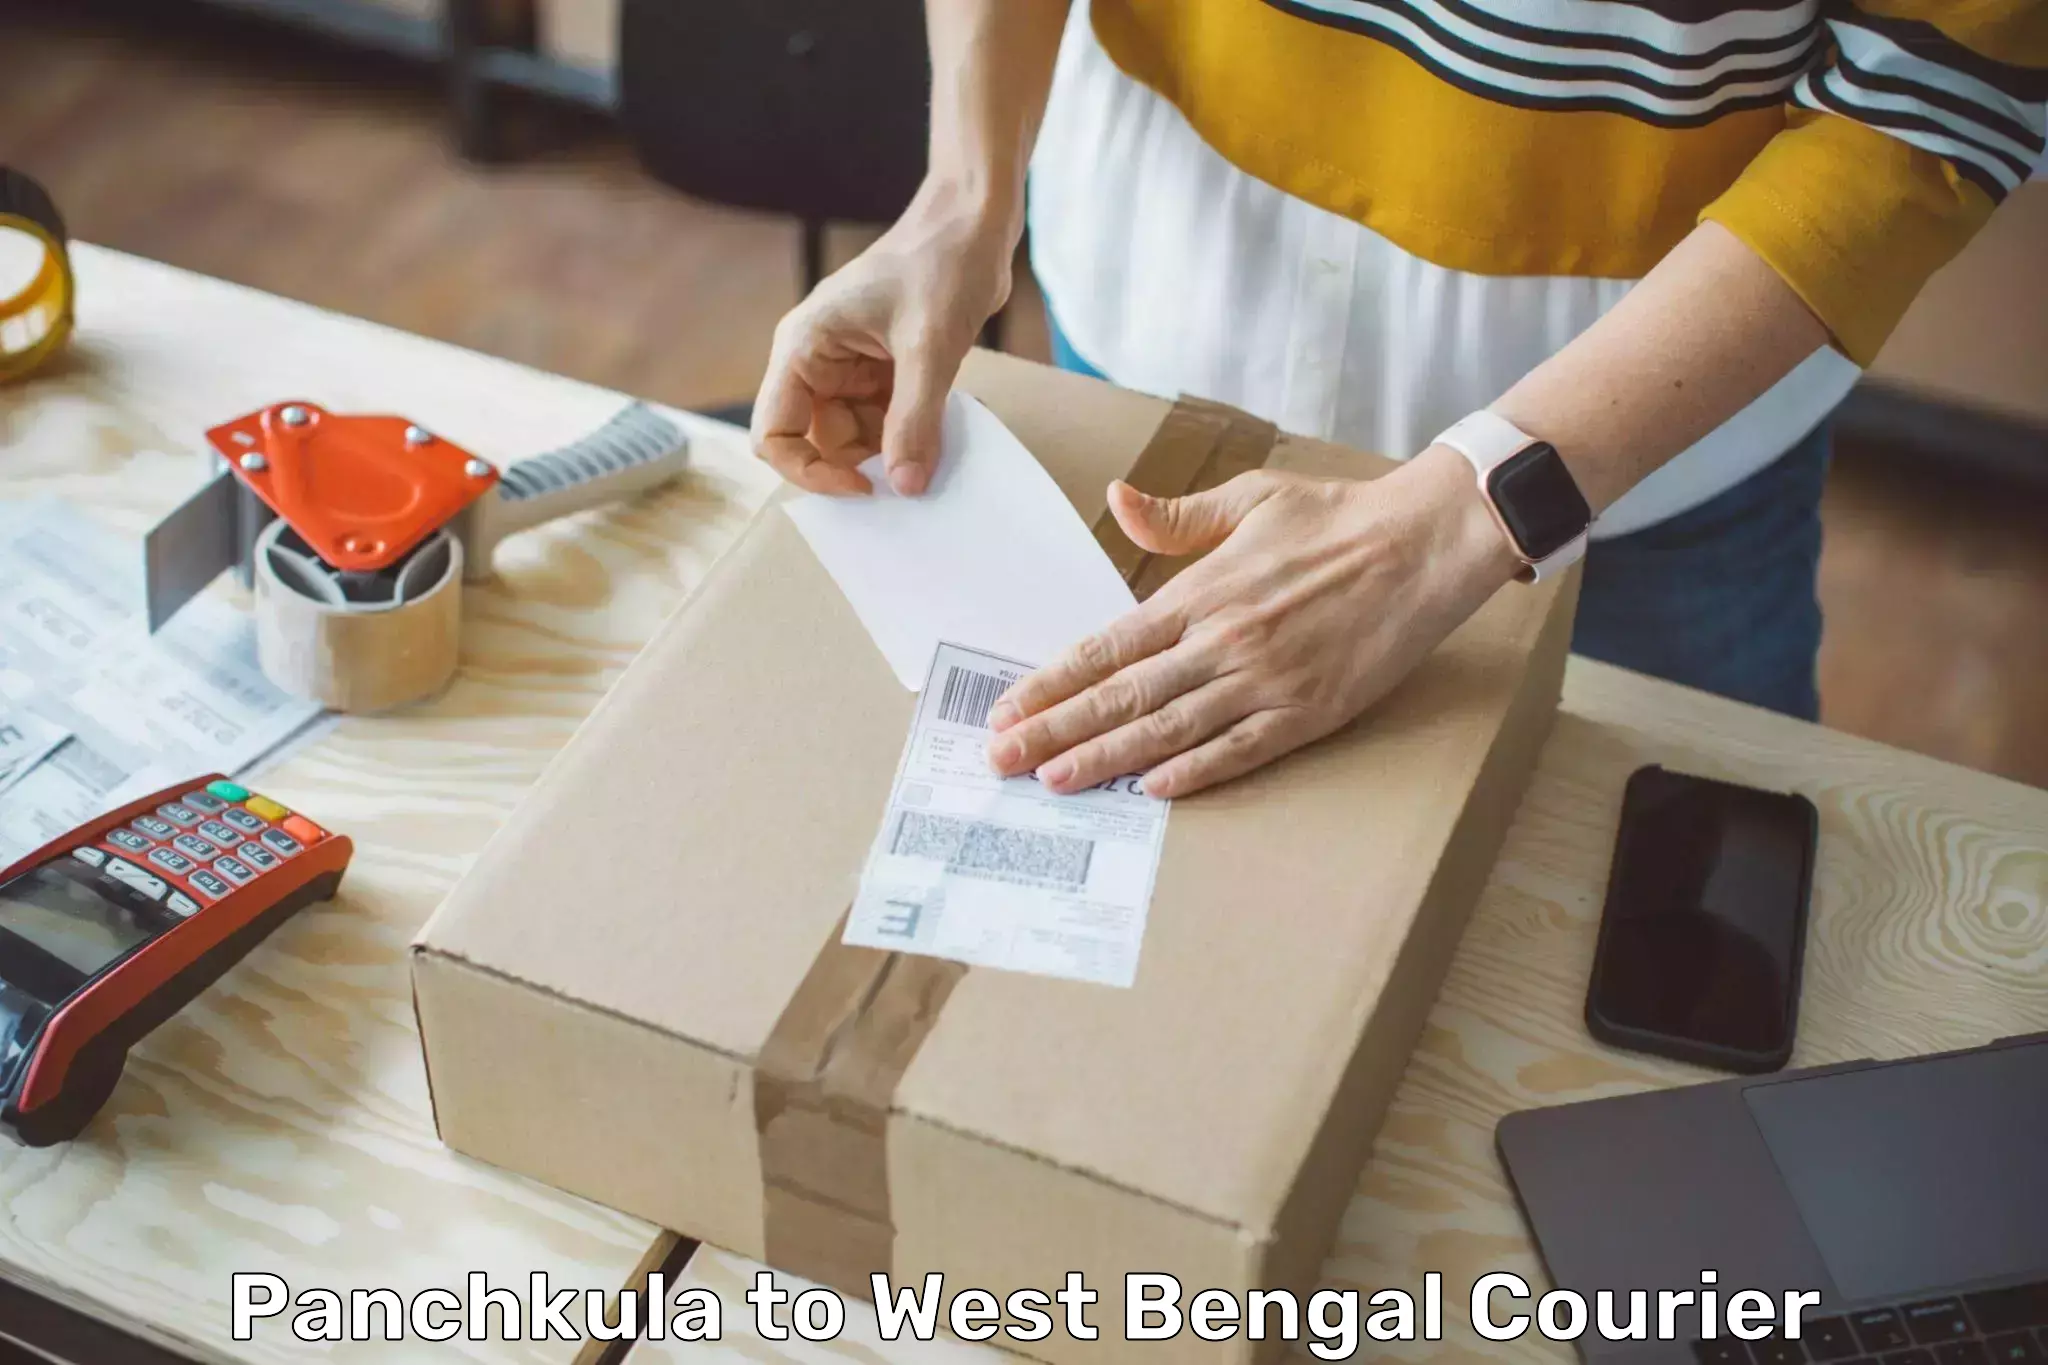 Global courier networks Panchkula to West Bengal